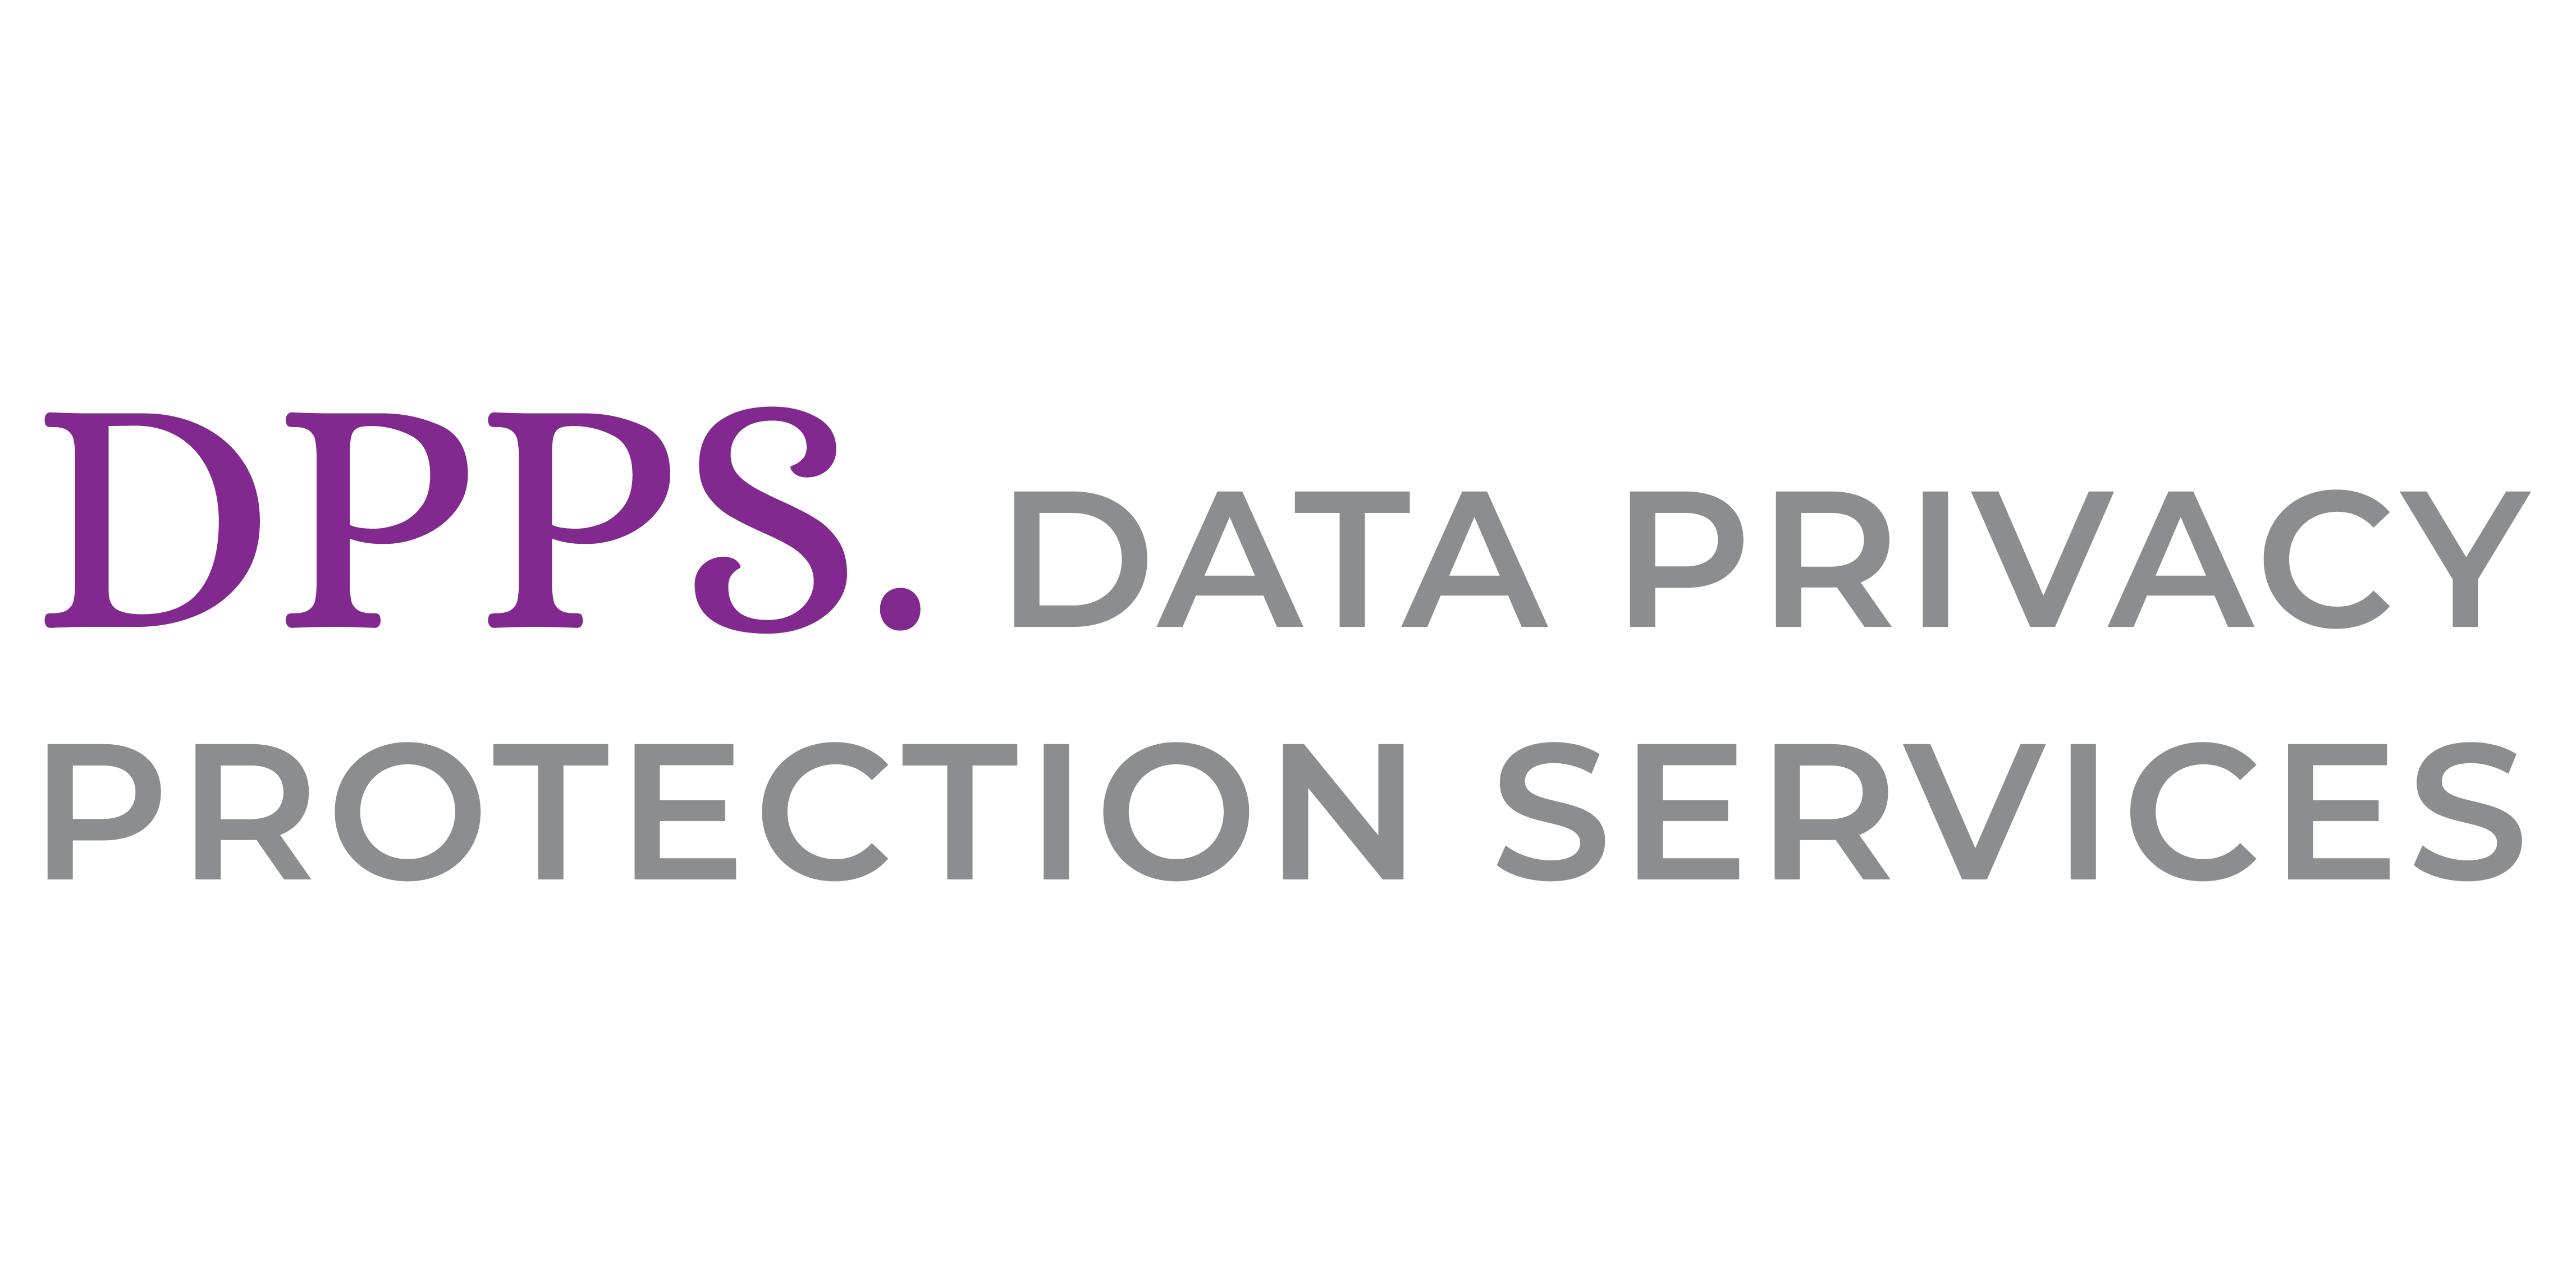 Data Privacy Protection Services